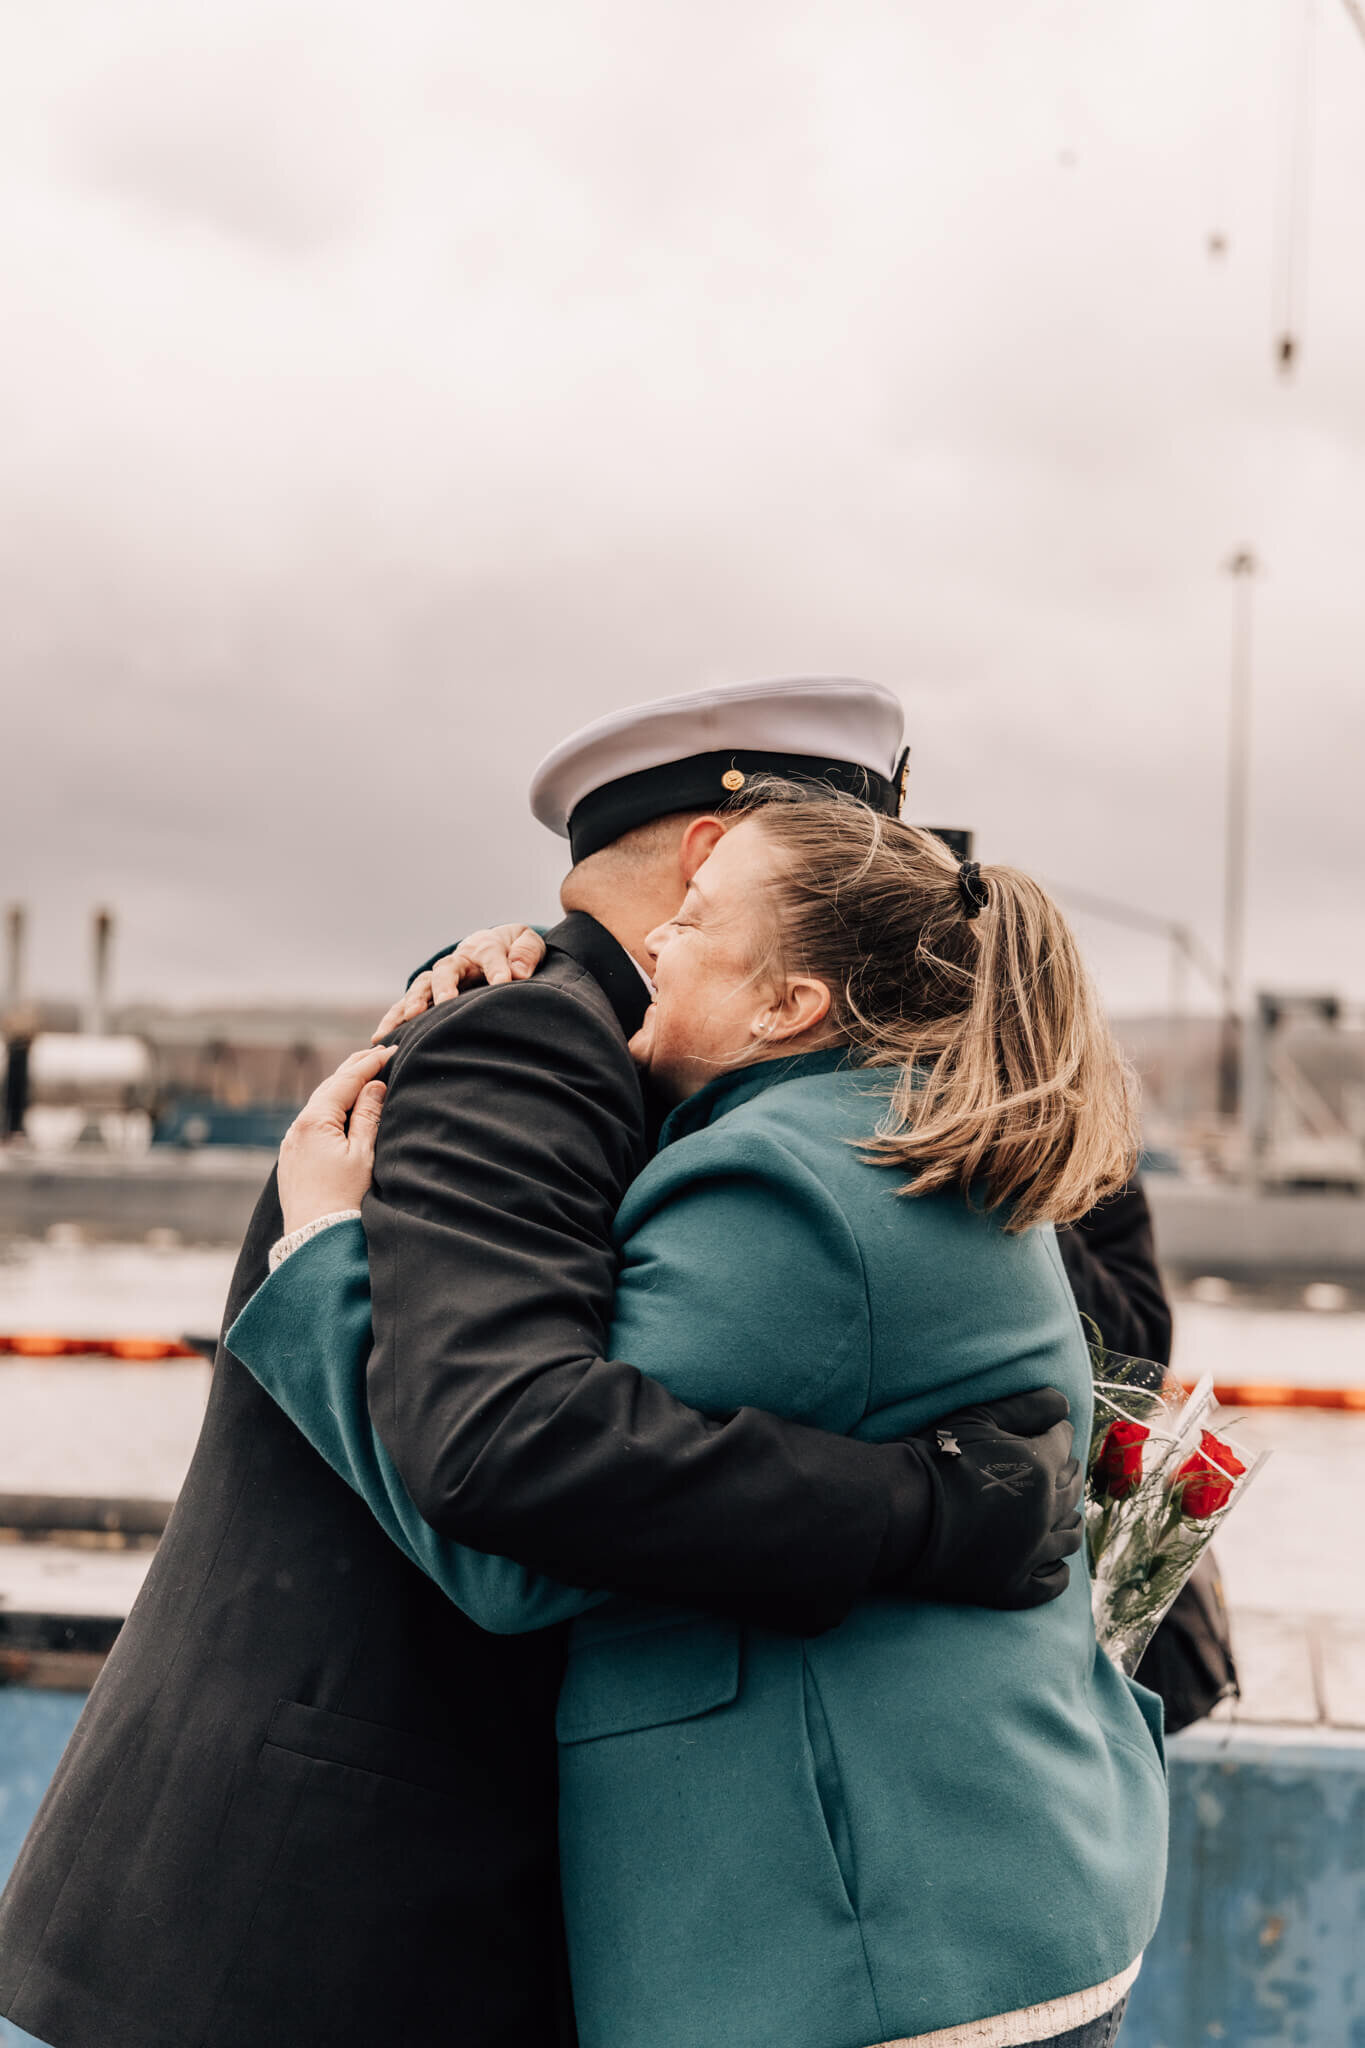 Chief petty officer hugs wife after returning from 6 month deployment on USS Minnesota.